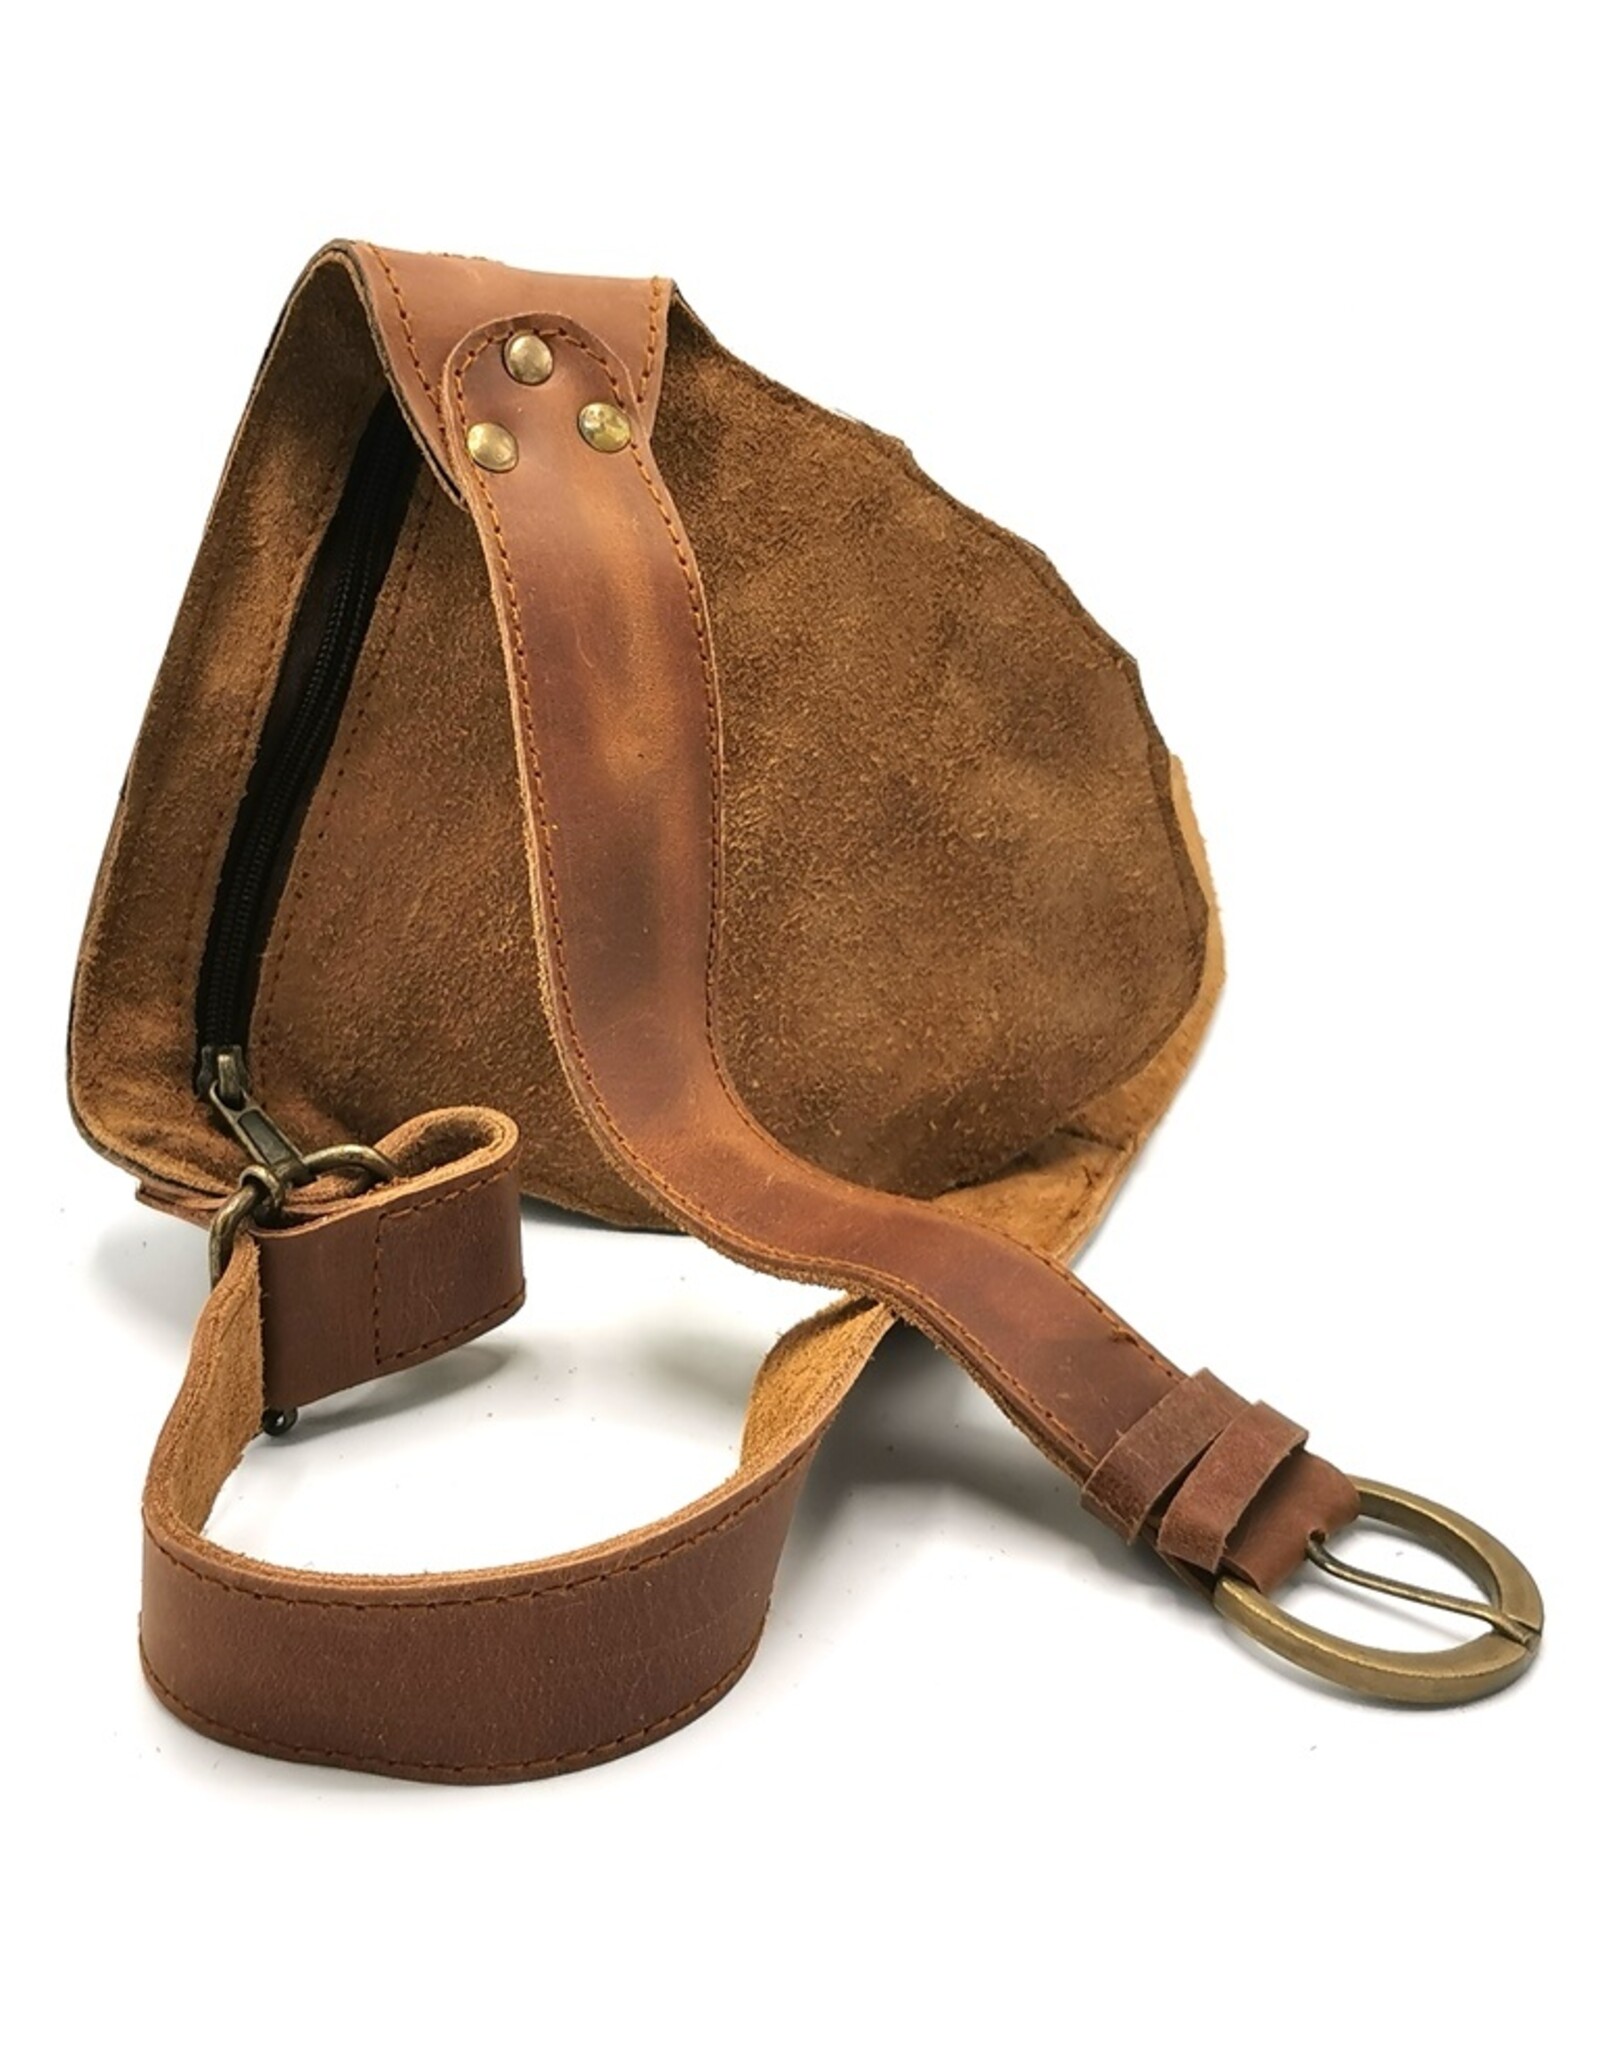 Trukado Leather Festival bags, waist bags and belt bags - Cowhide waist bag with Animal print and hook cognac